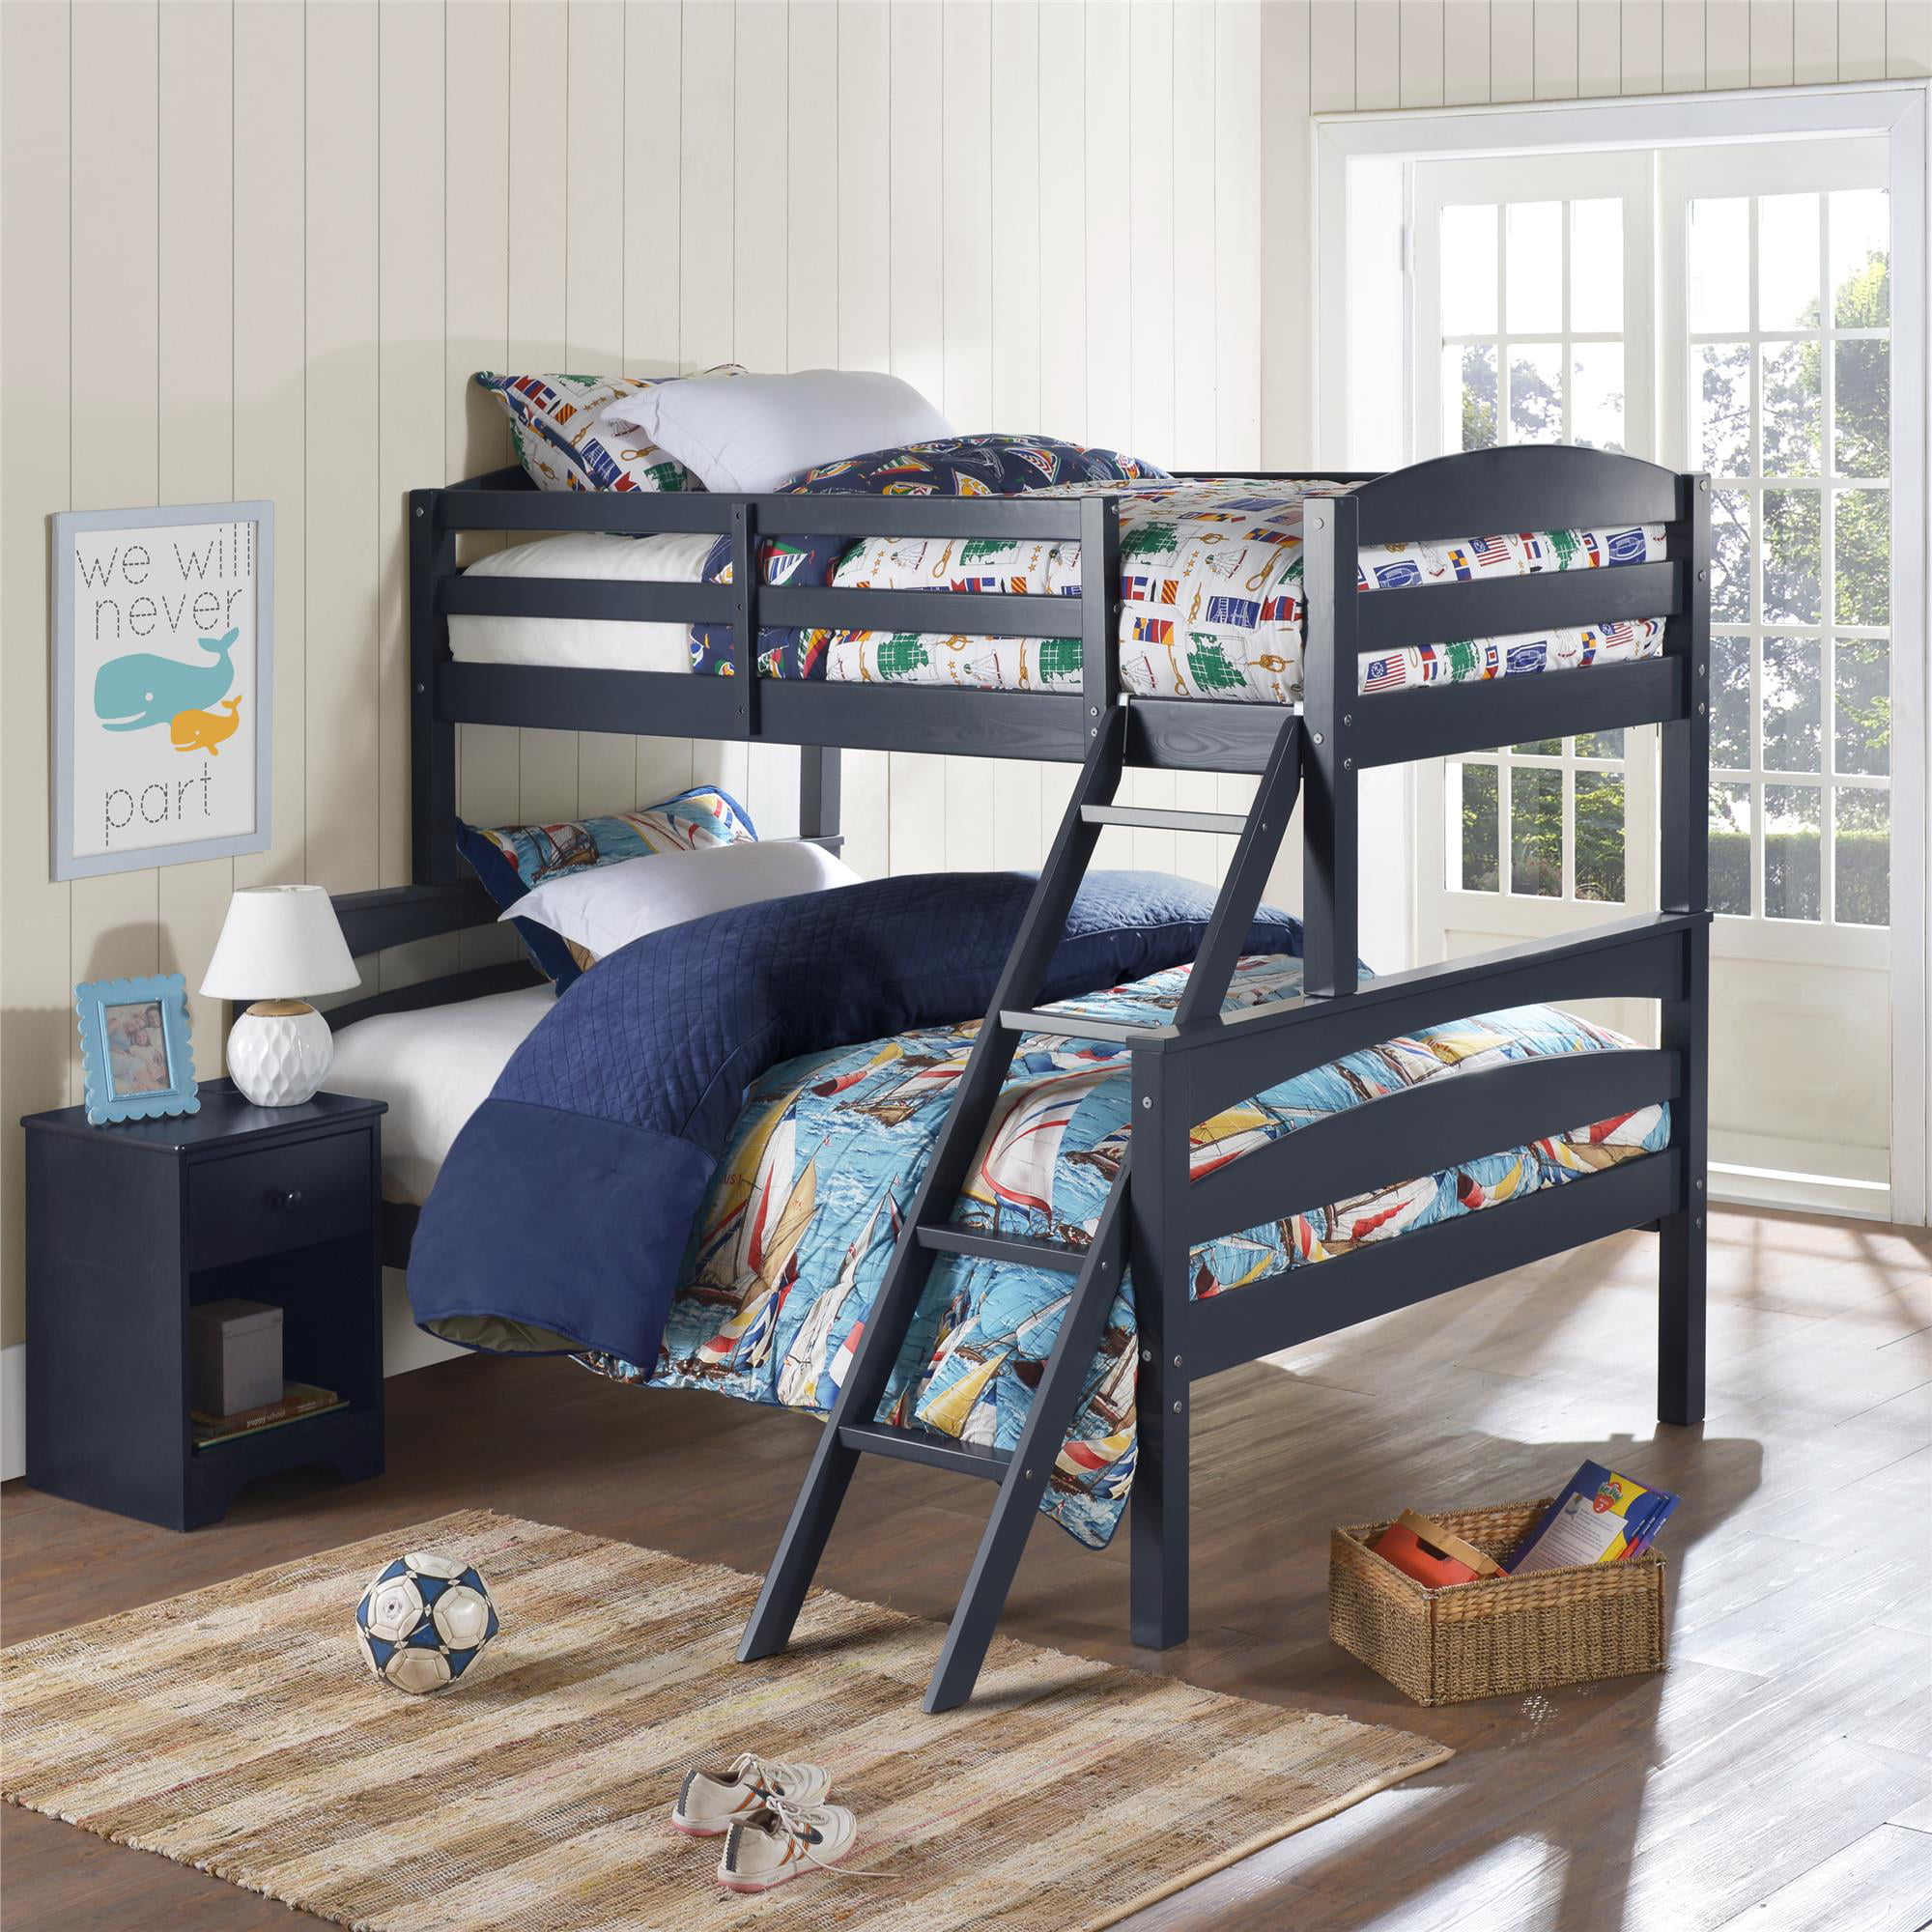 Better Homes Gardens Leighton Wood, Sears Wooden Bunk Beds